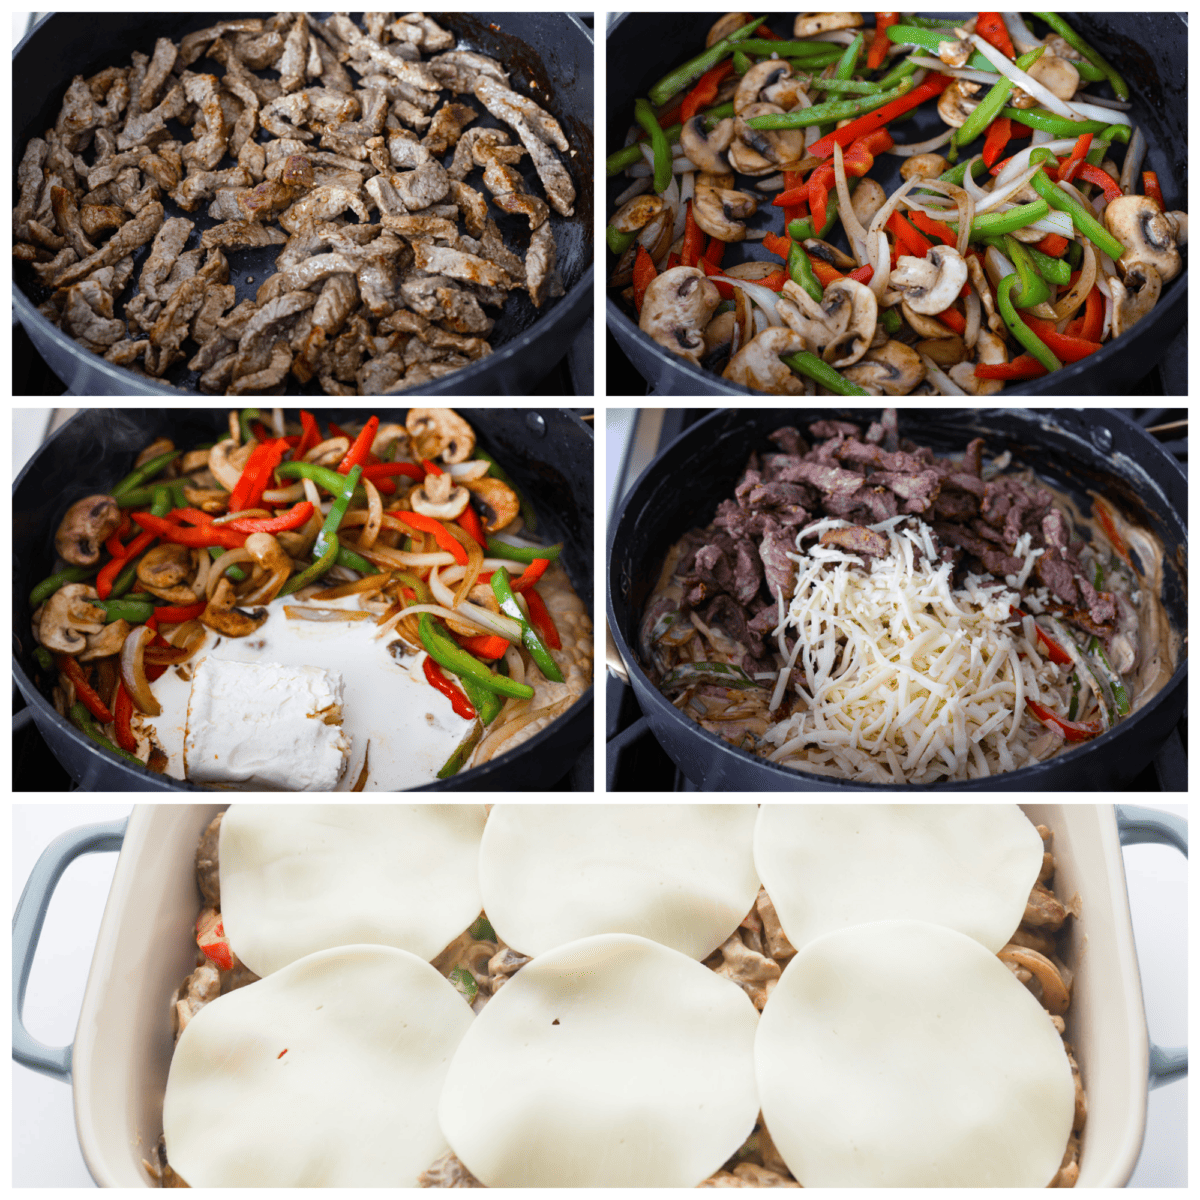 5 pictures showing how to cook the meat and veggies in a skillet. 